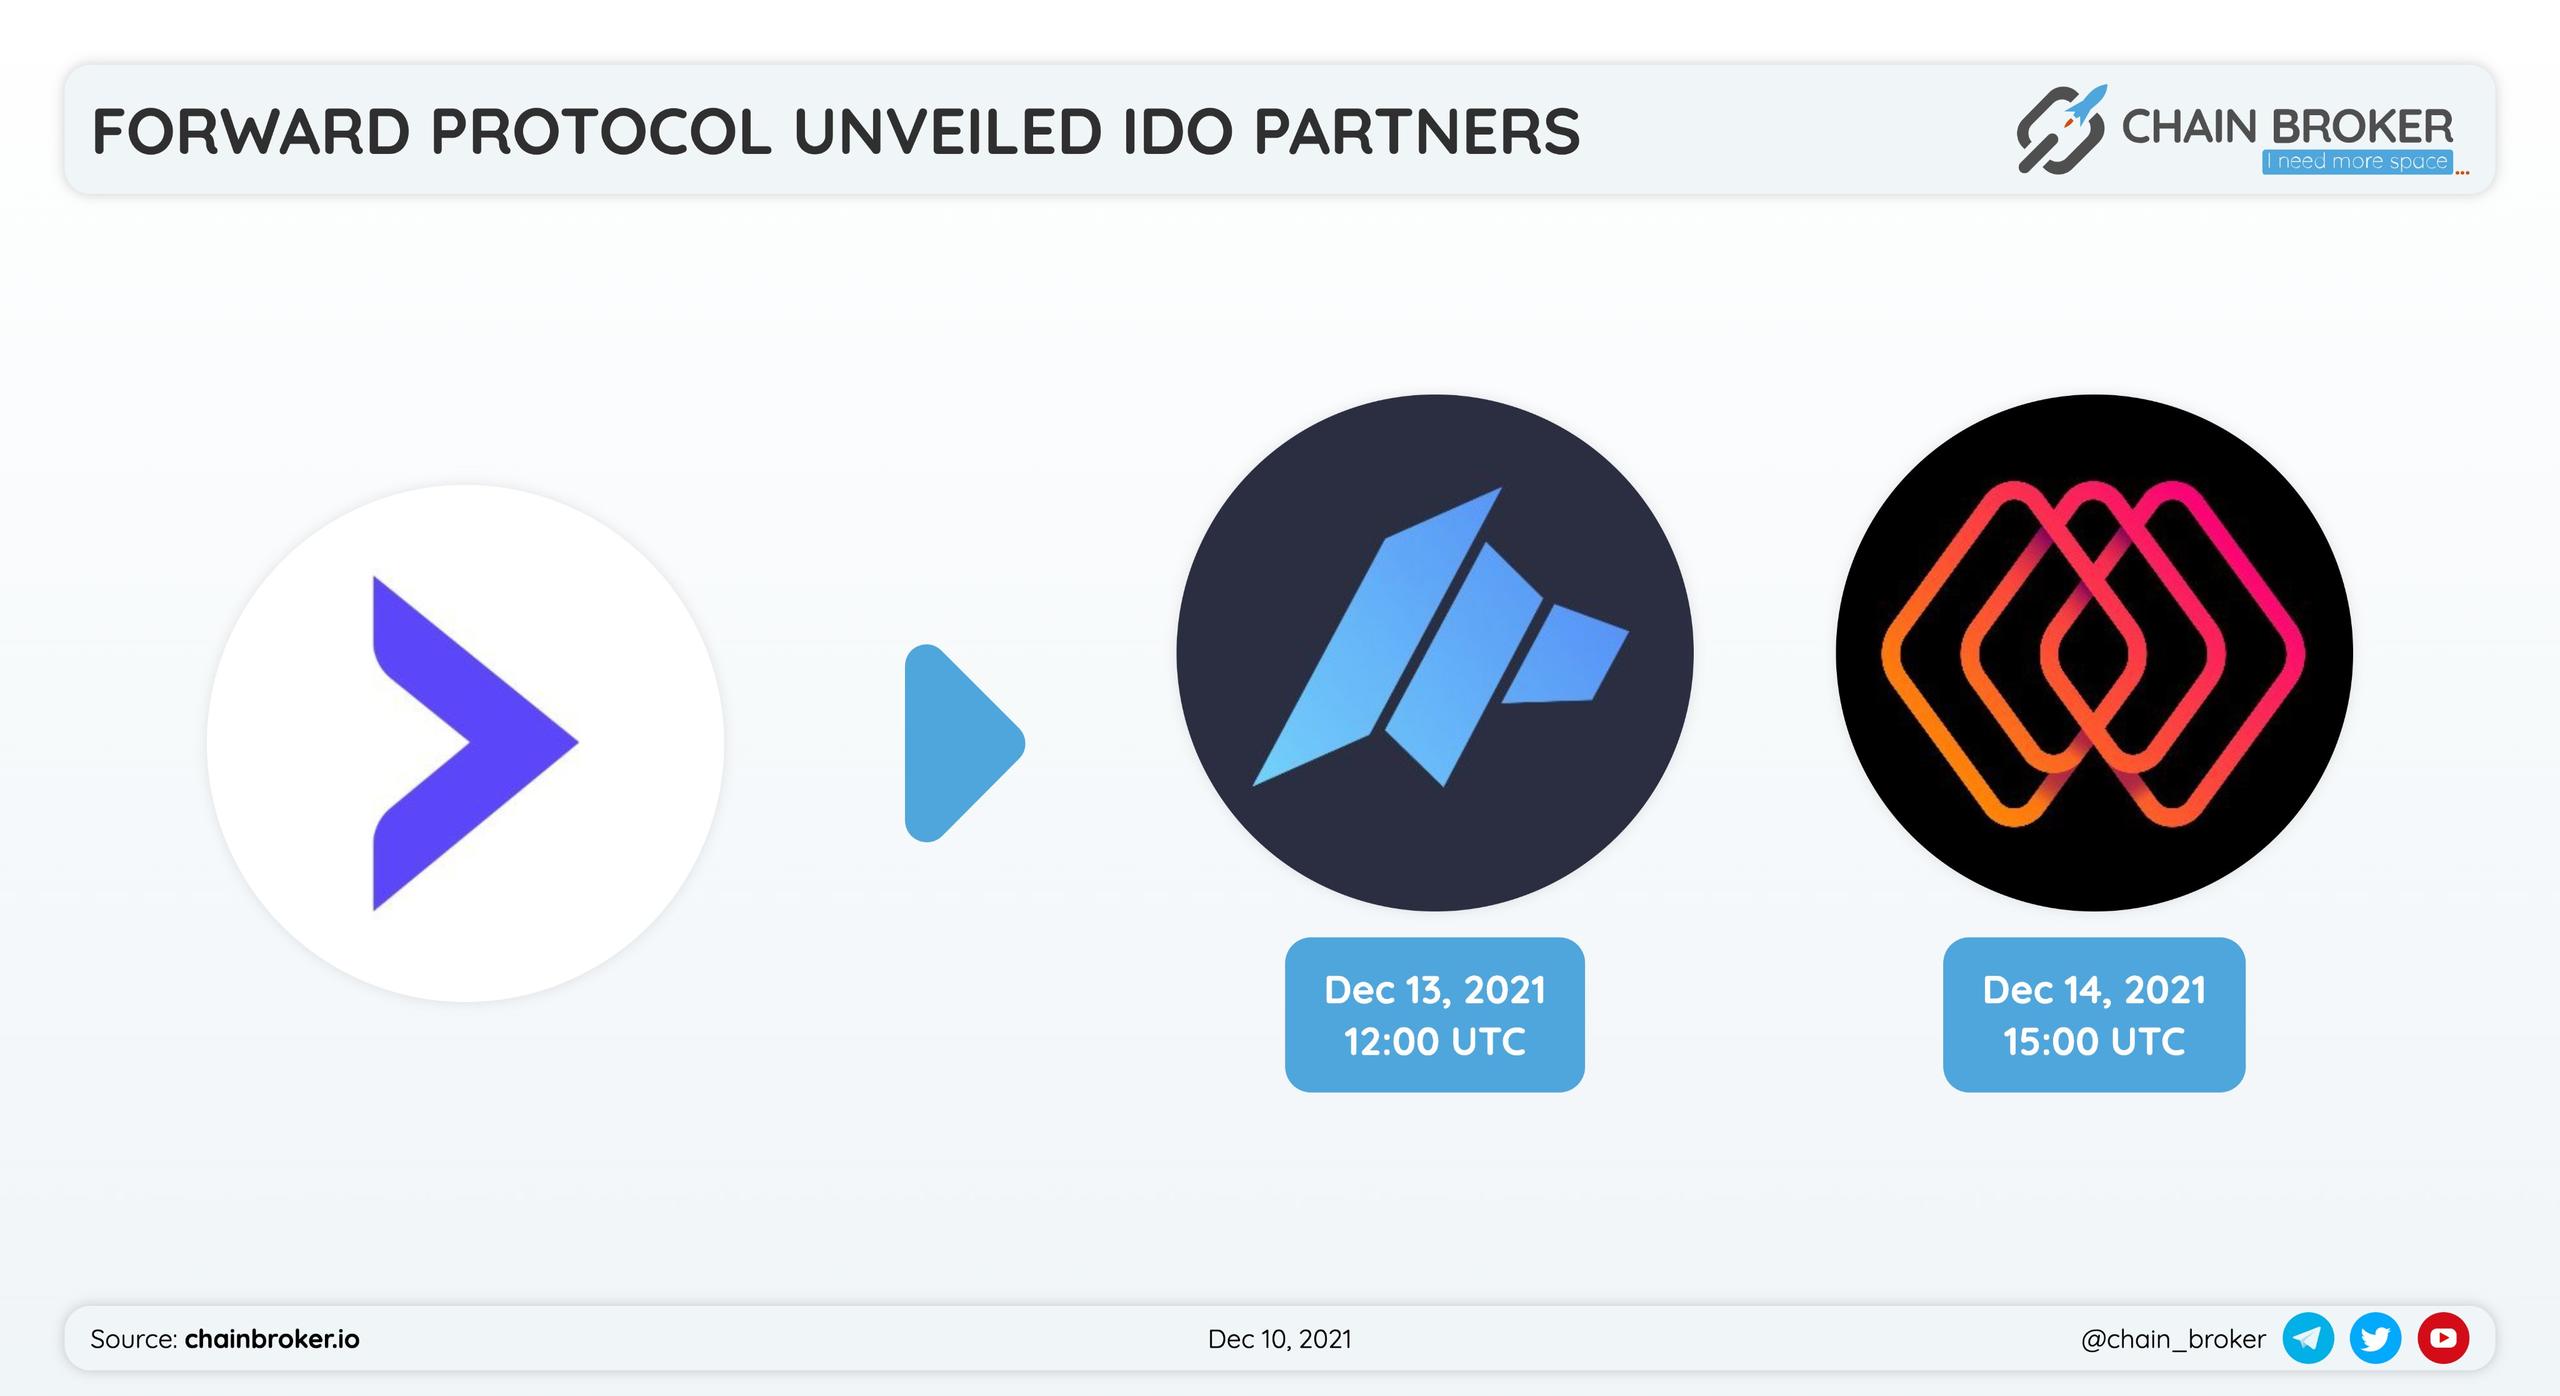 Forward Protocol has partnered with Dao Maker and MahaDAO for a token launch.